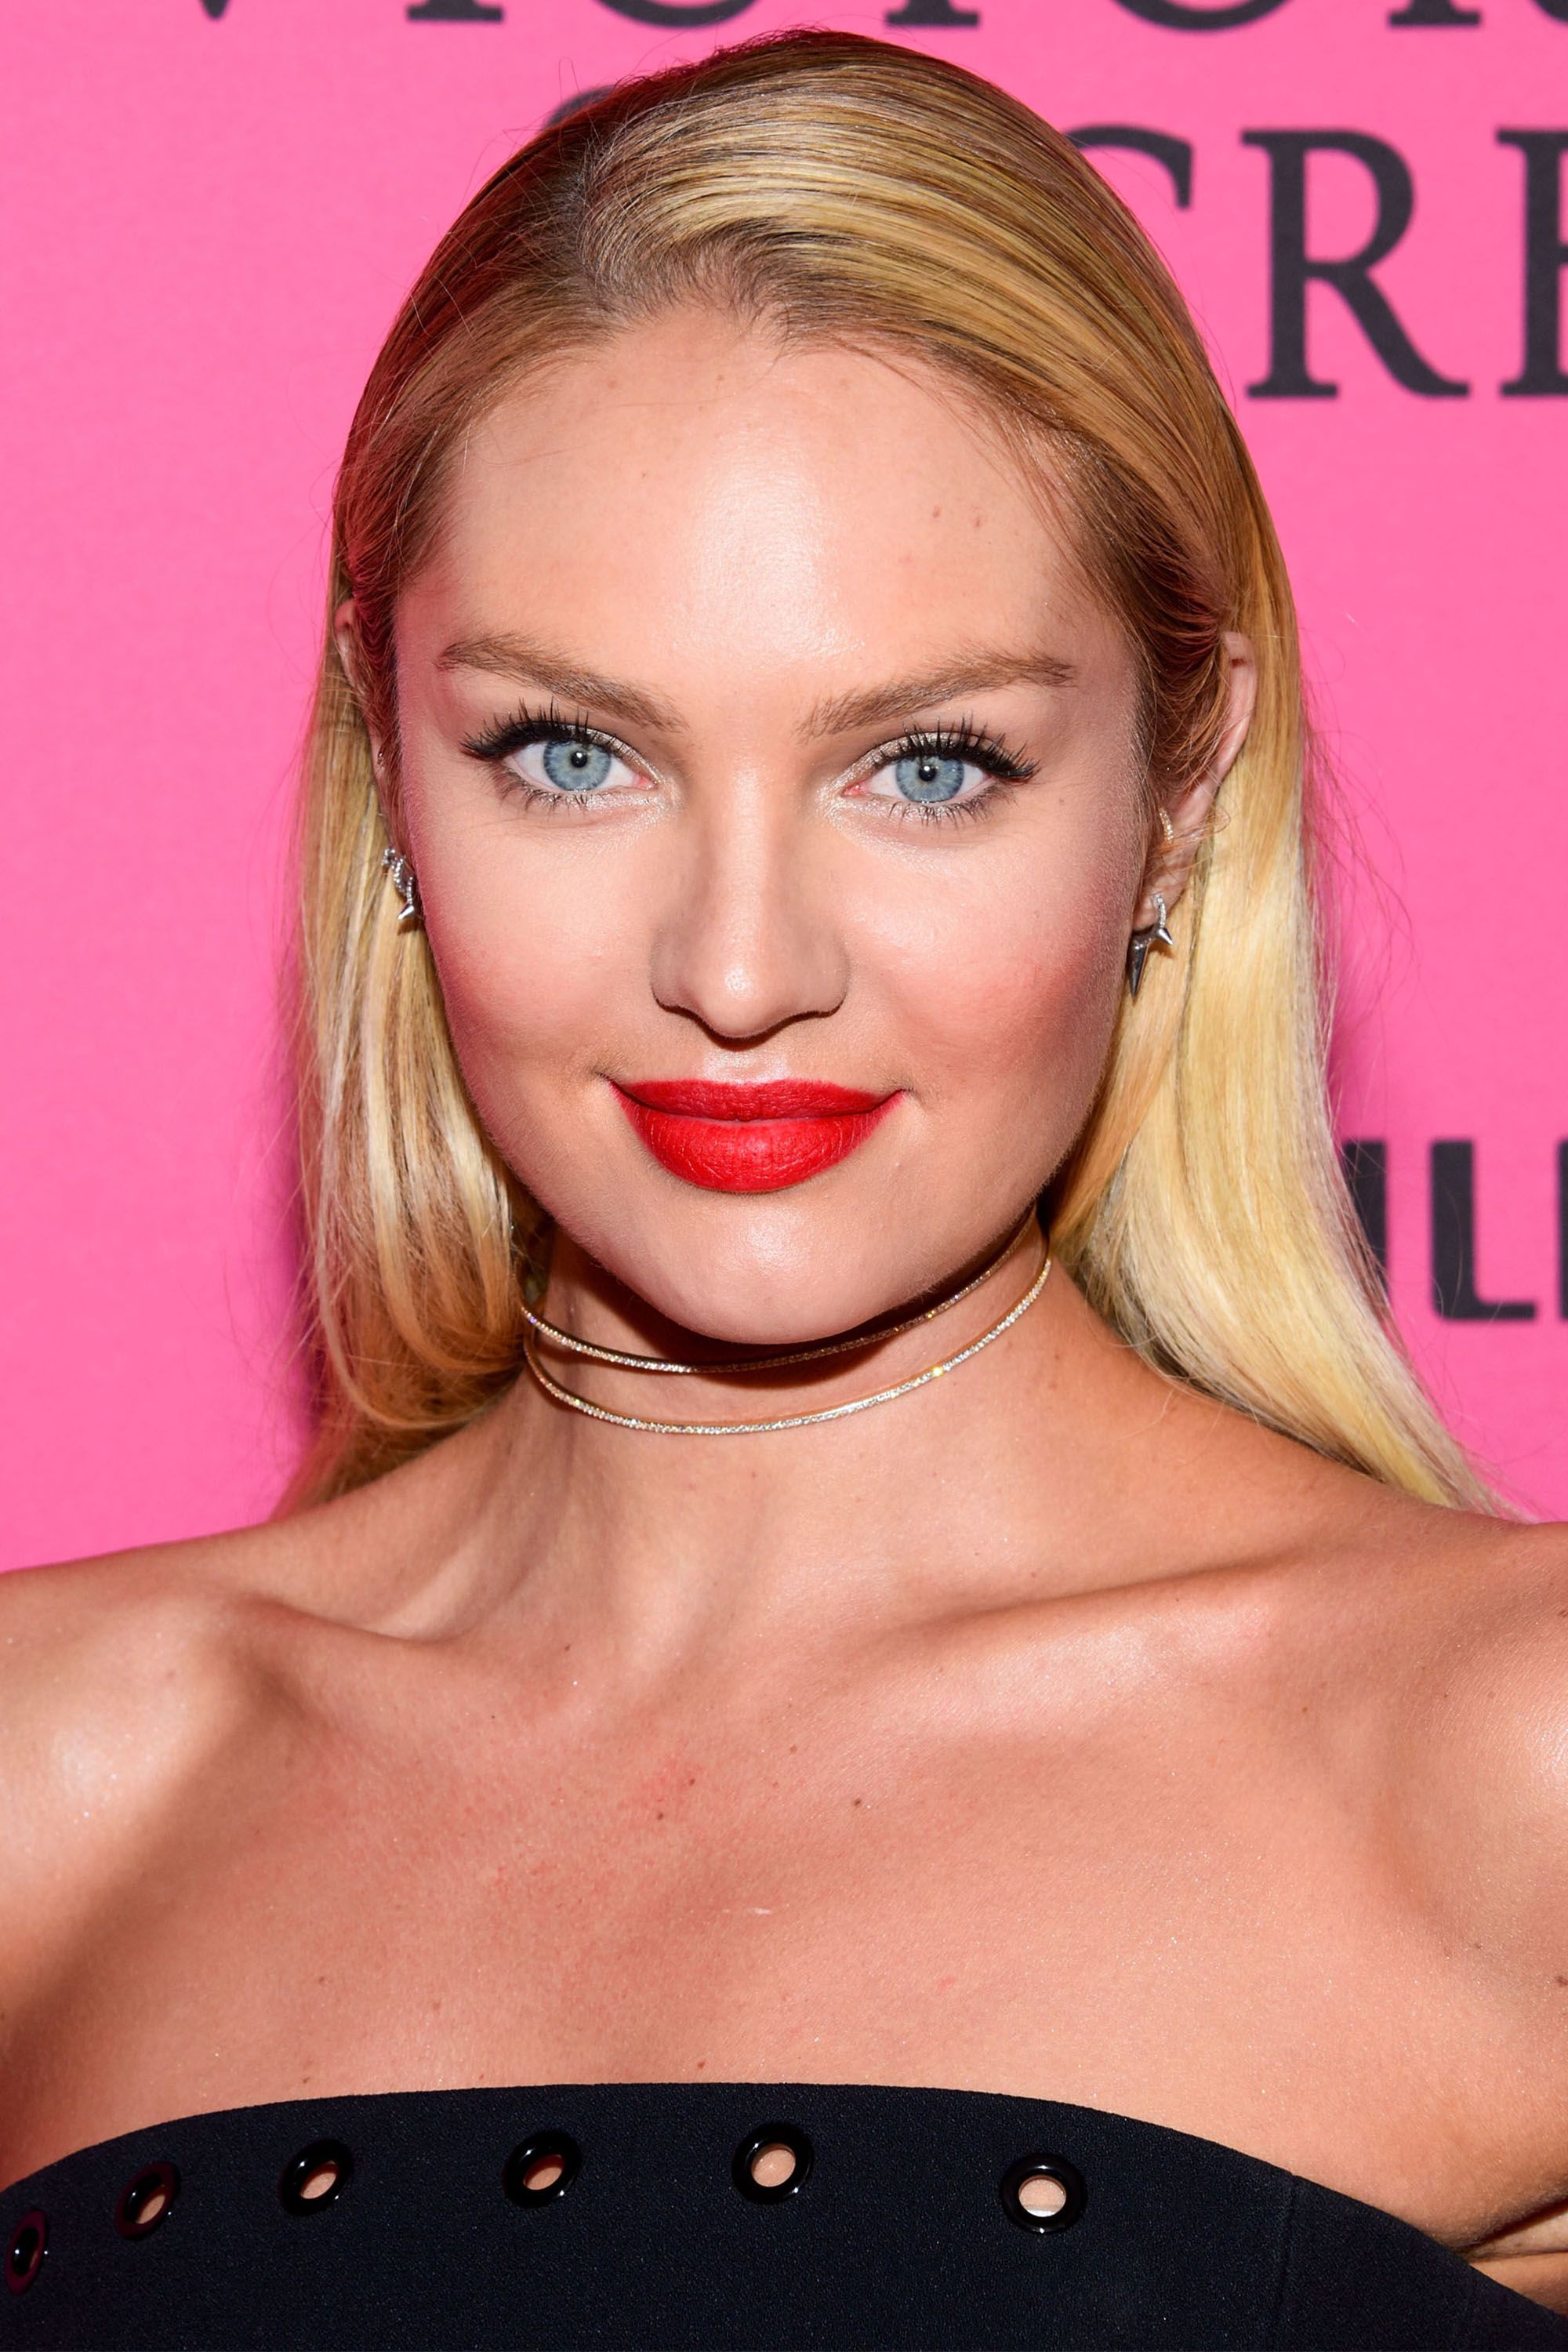 Candice Swanepoel's Beauty Essentials - Candice Swanepoel Beauty Routine